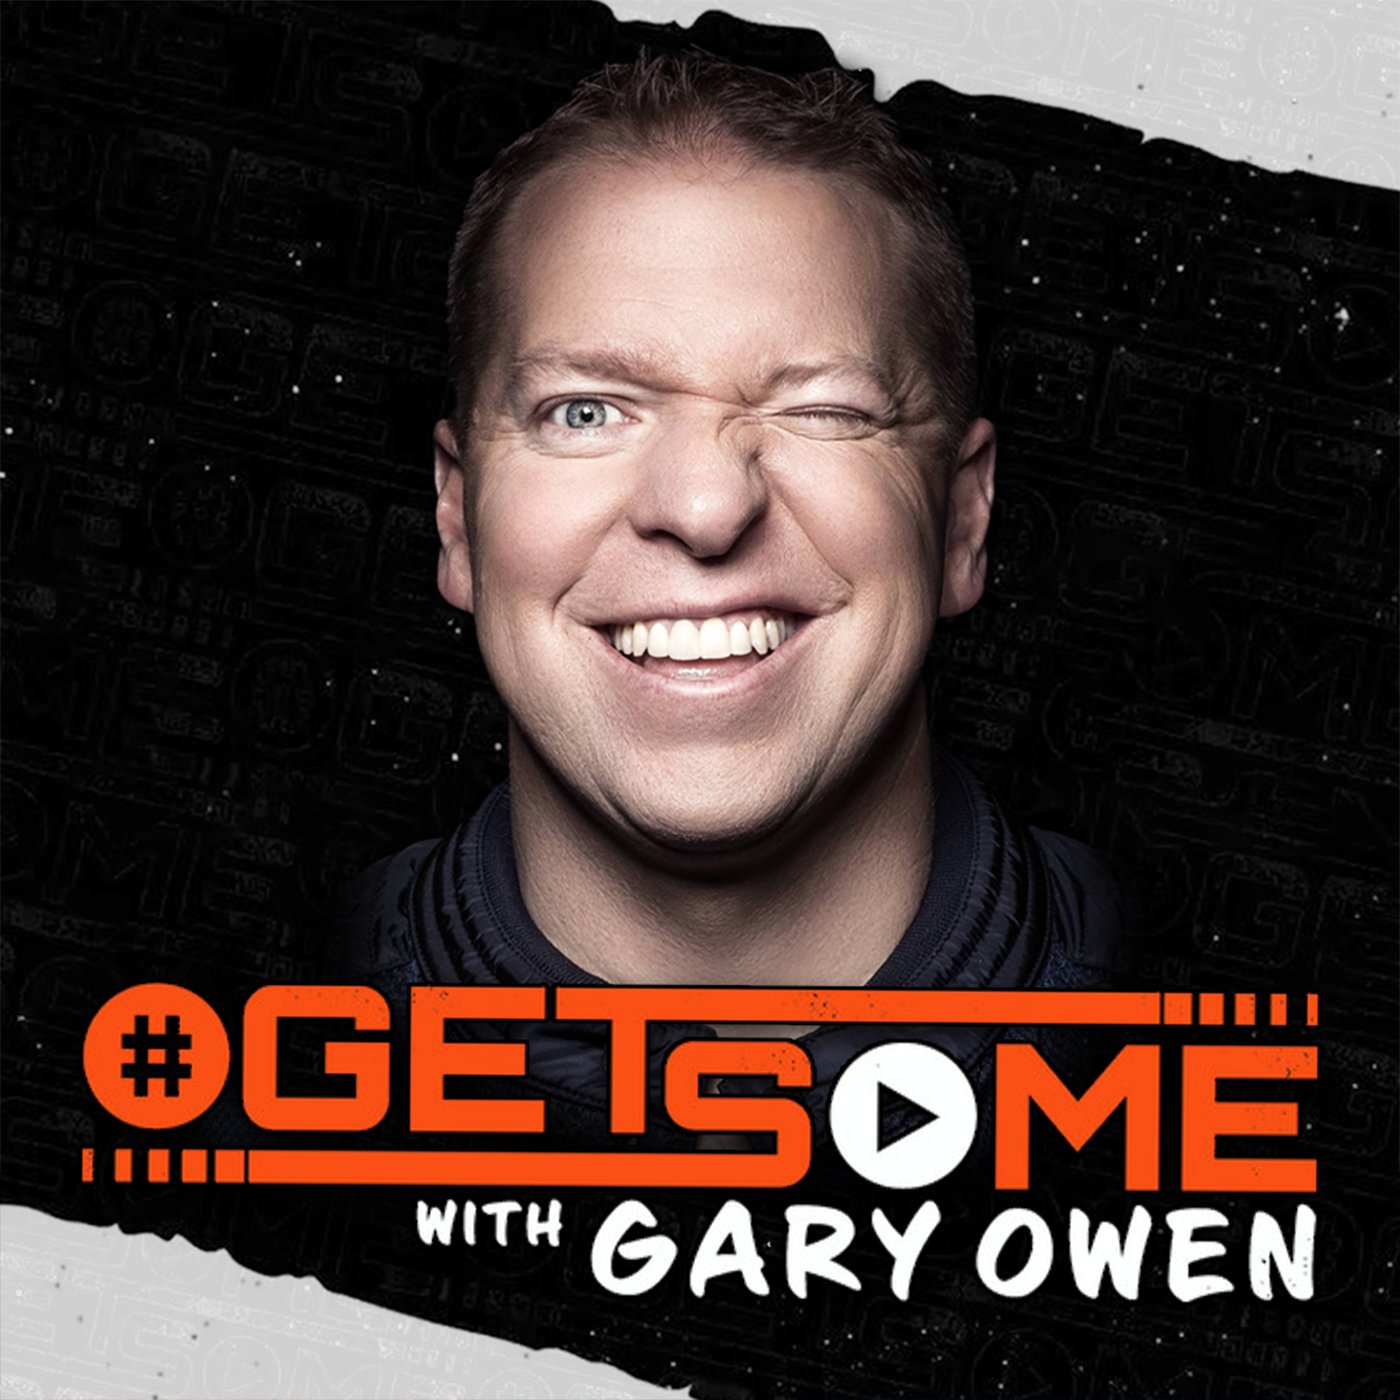 Tone Bell | #GetSome with Gary Owen Ep. 146